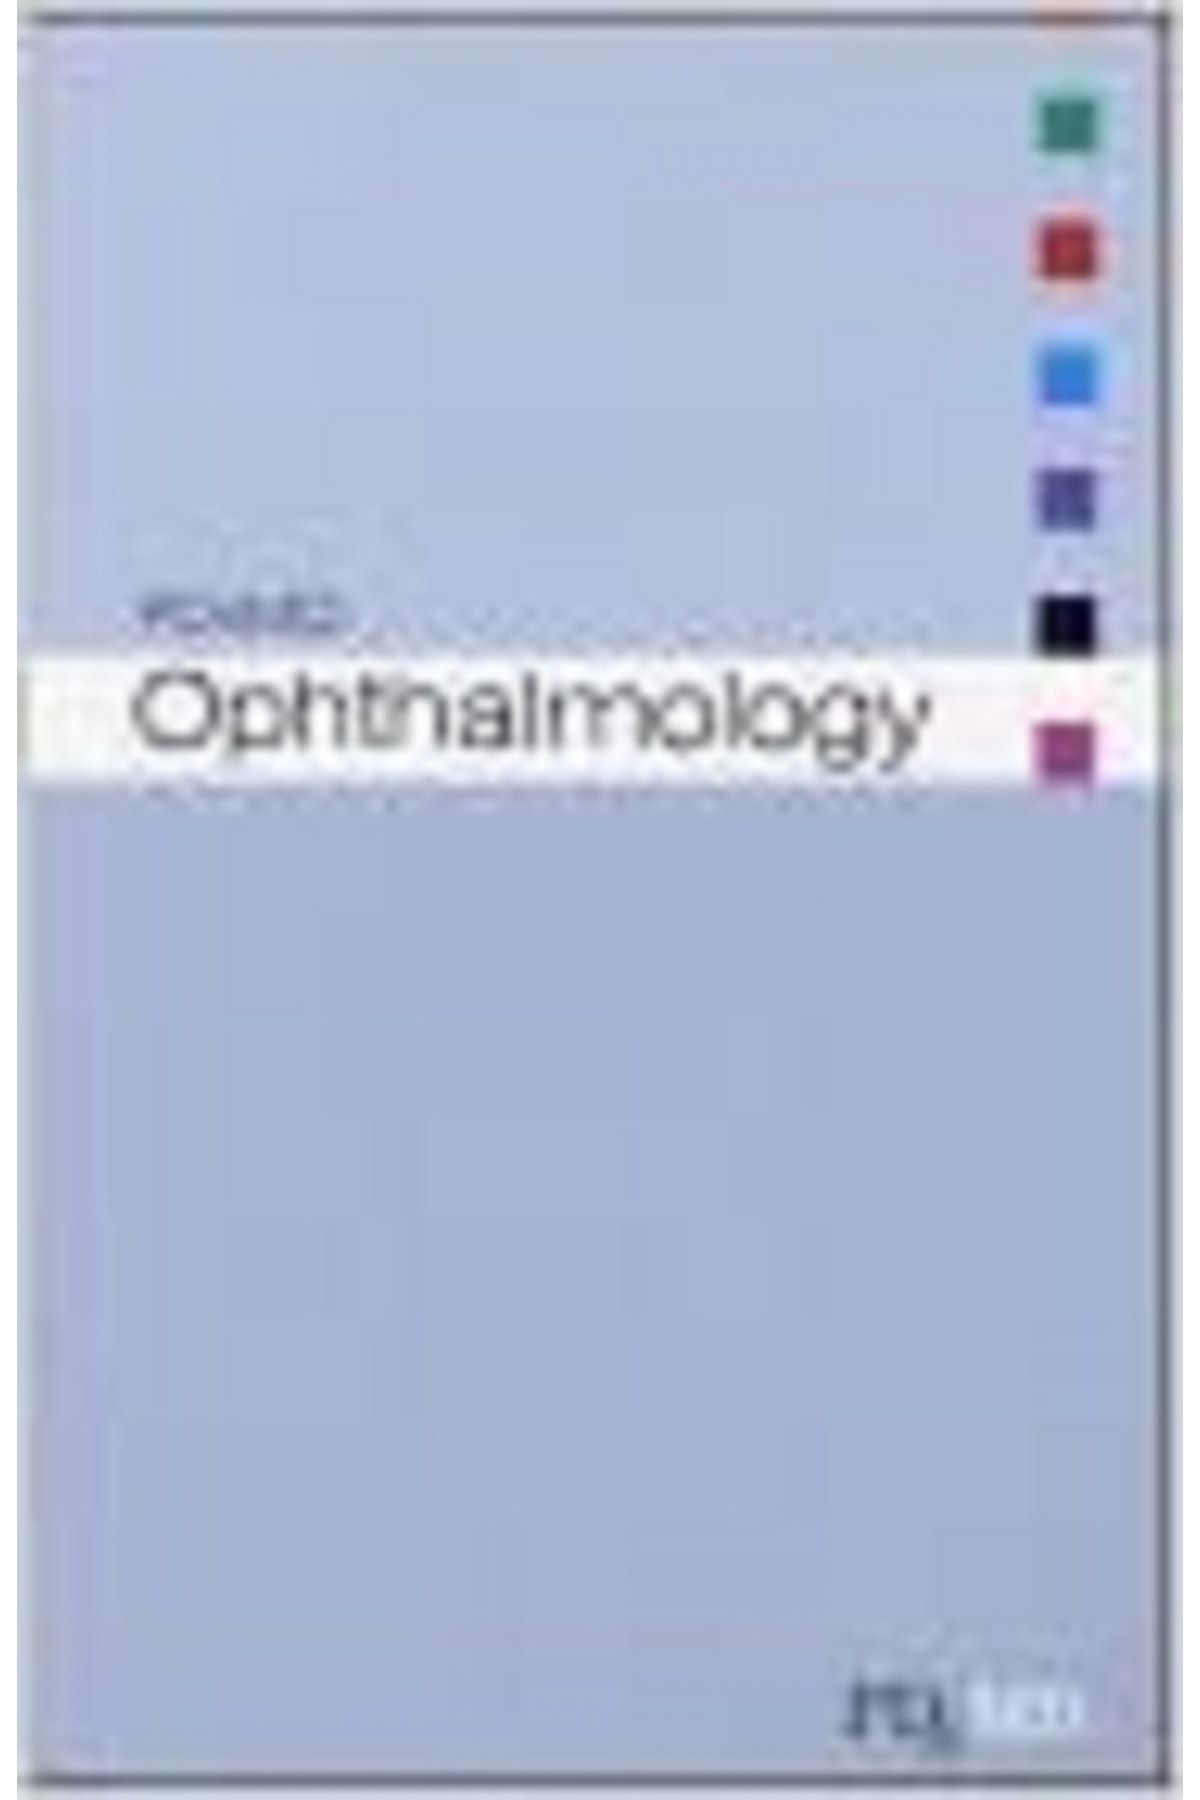 PDX Md Ophthalmology (fırstconsult) 1st Edition